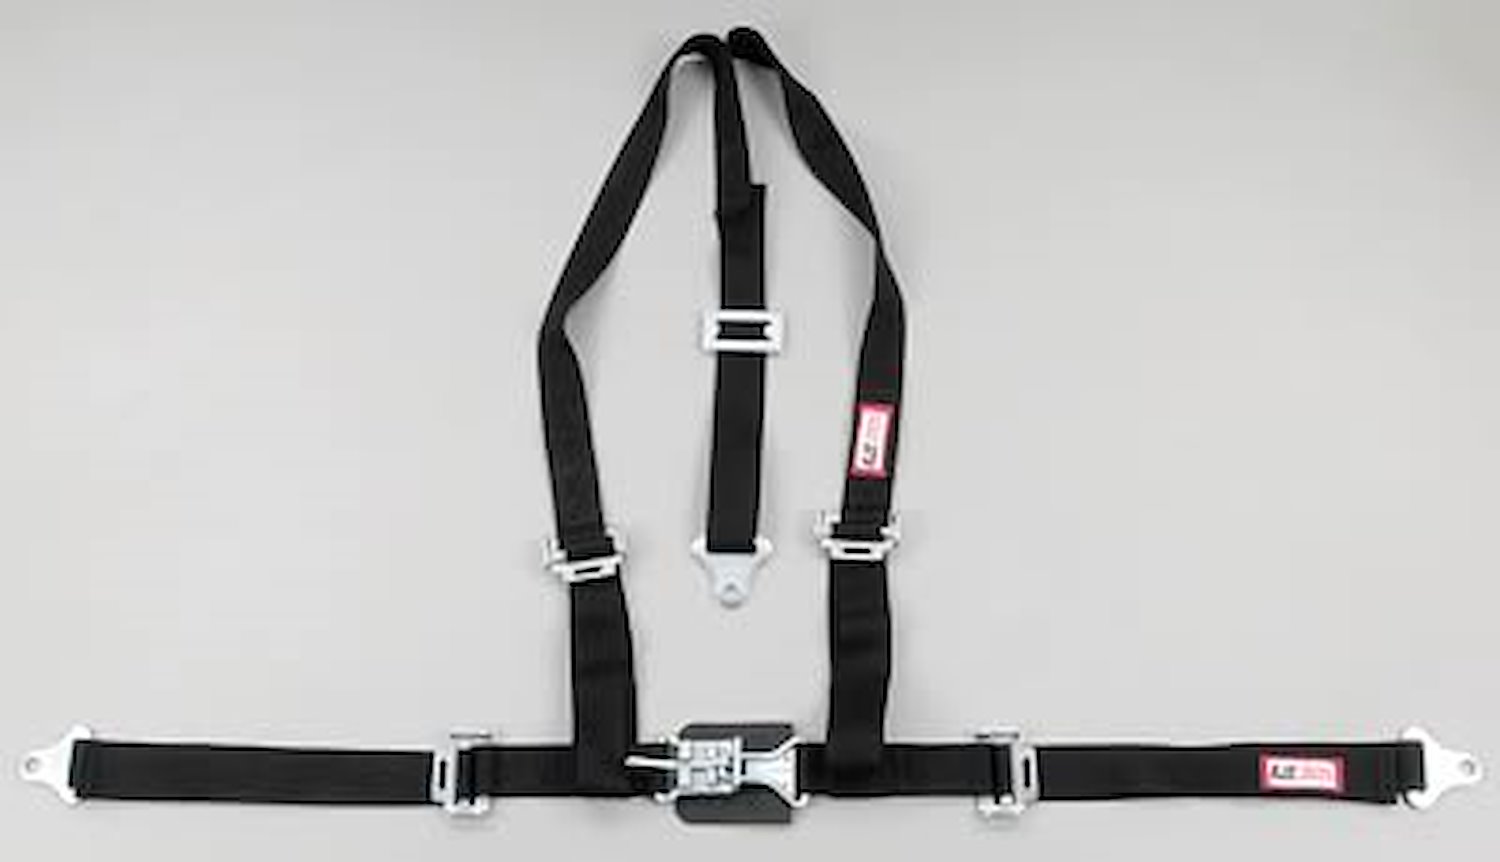 NON-SFI L&L HARNESS 3 PULL DOWN Lap Belt SEWN IN 2 S.H. Individual FLOOR Mount w/STERNUM STRAP ALL WRAP ENDS BLACK